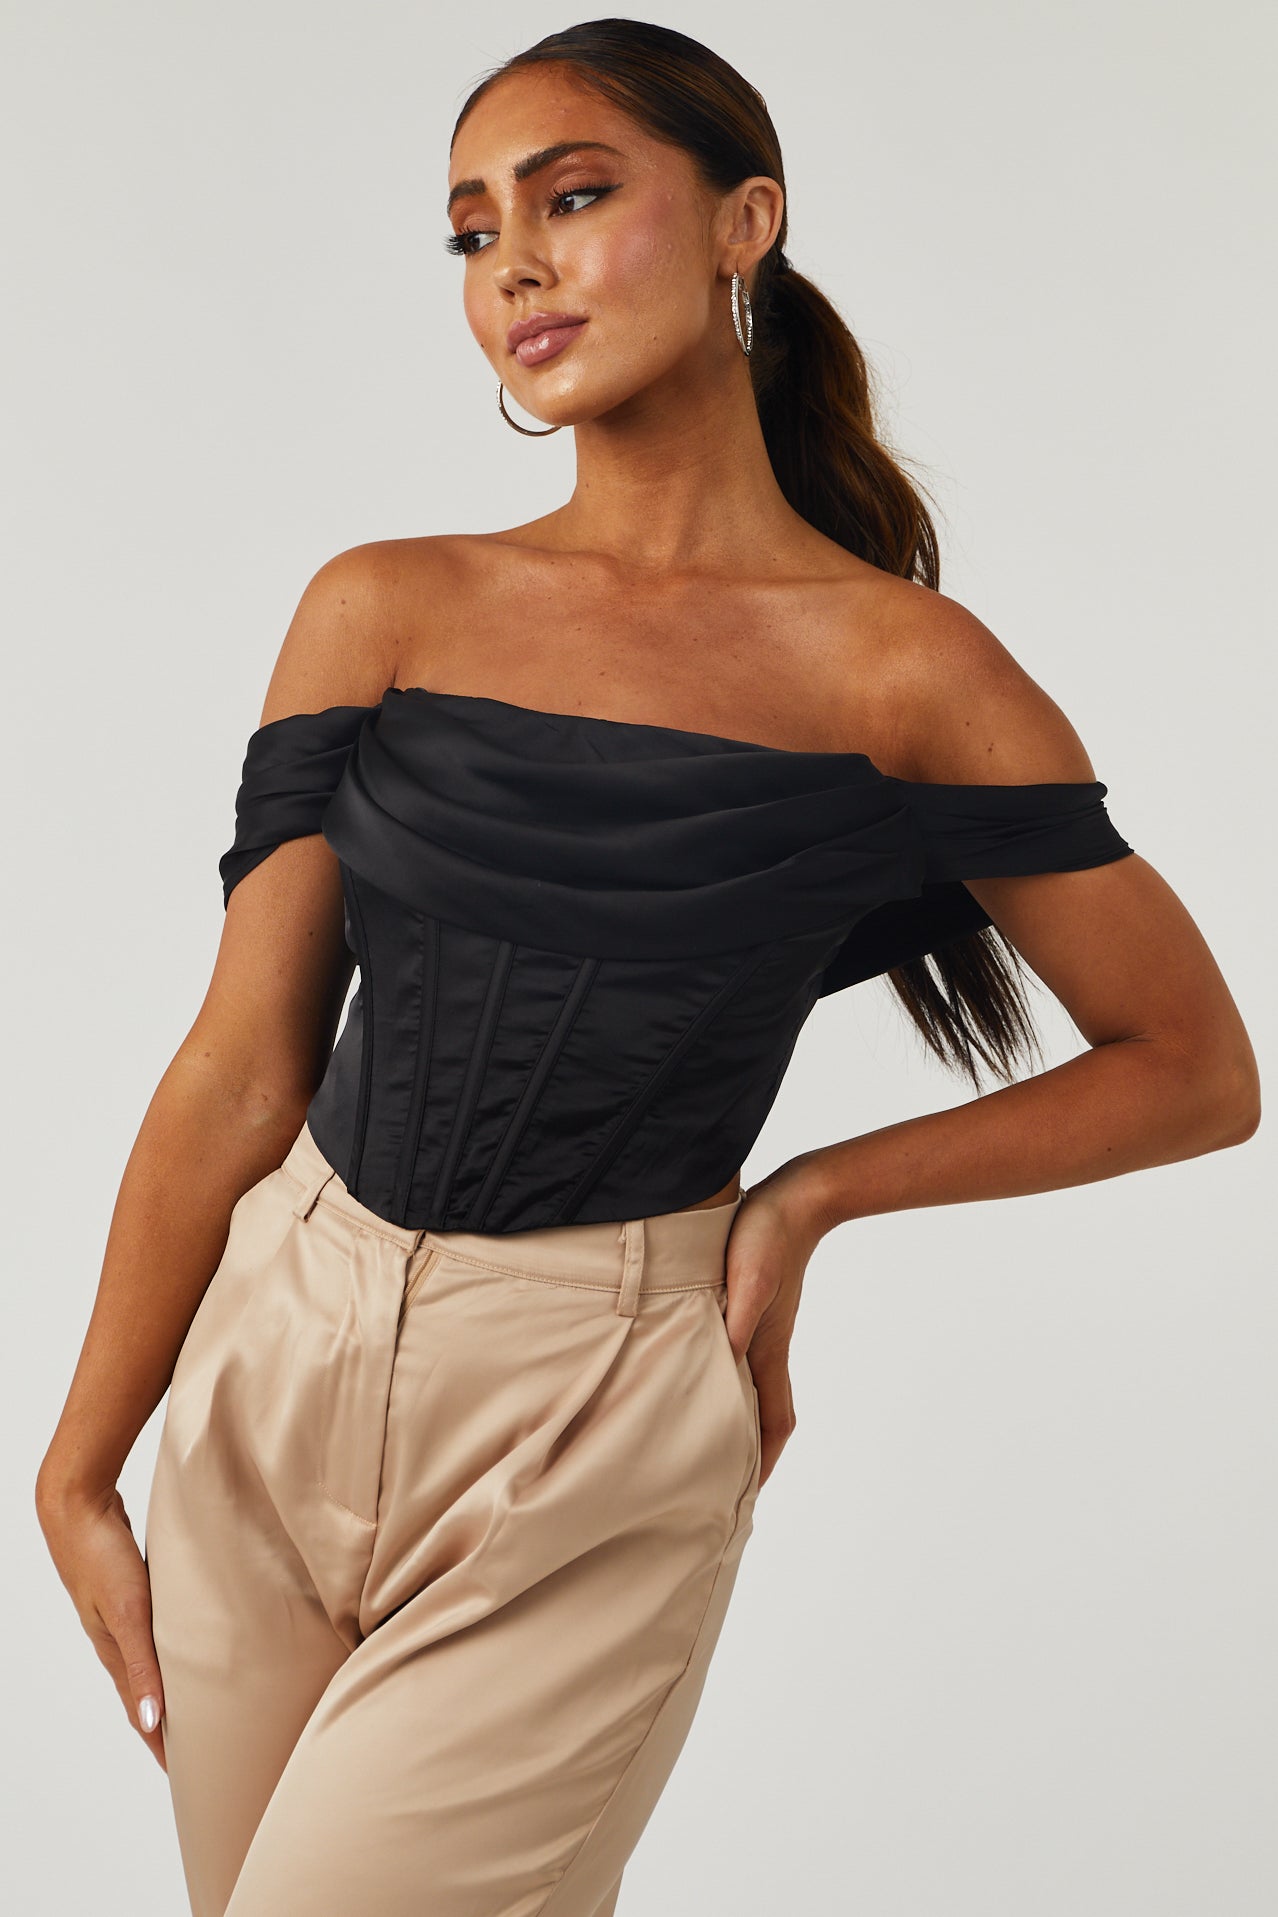 Shop Missguided Green Bralettes up to 65% Off